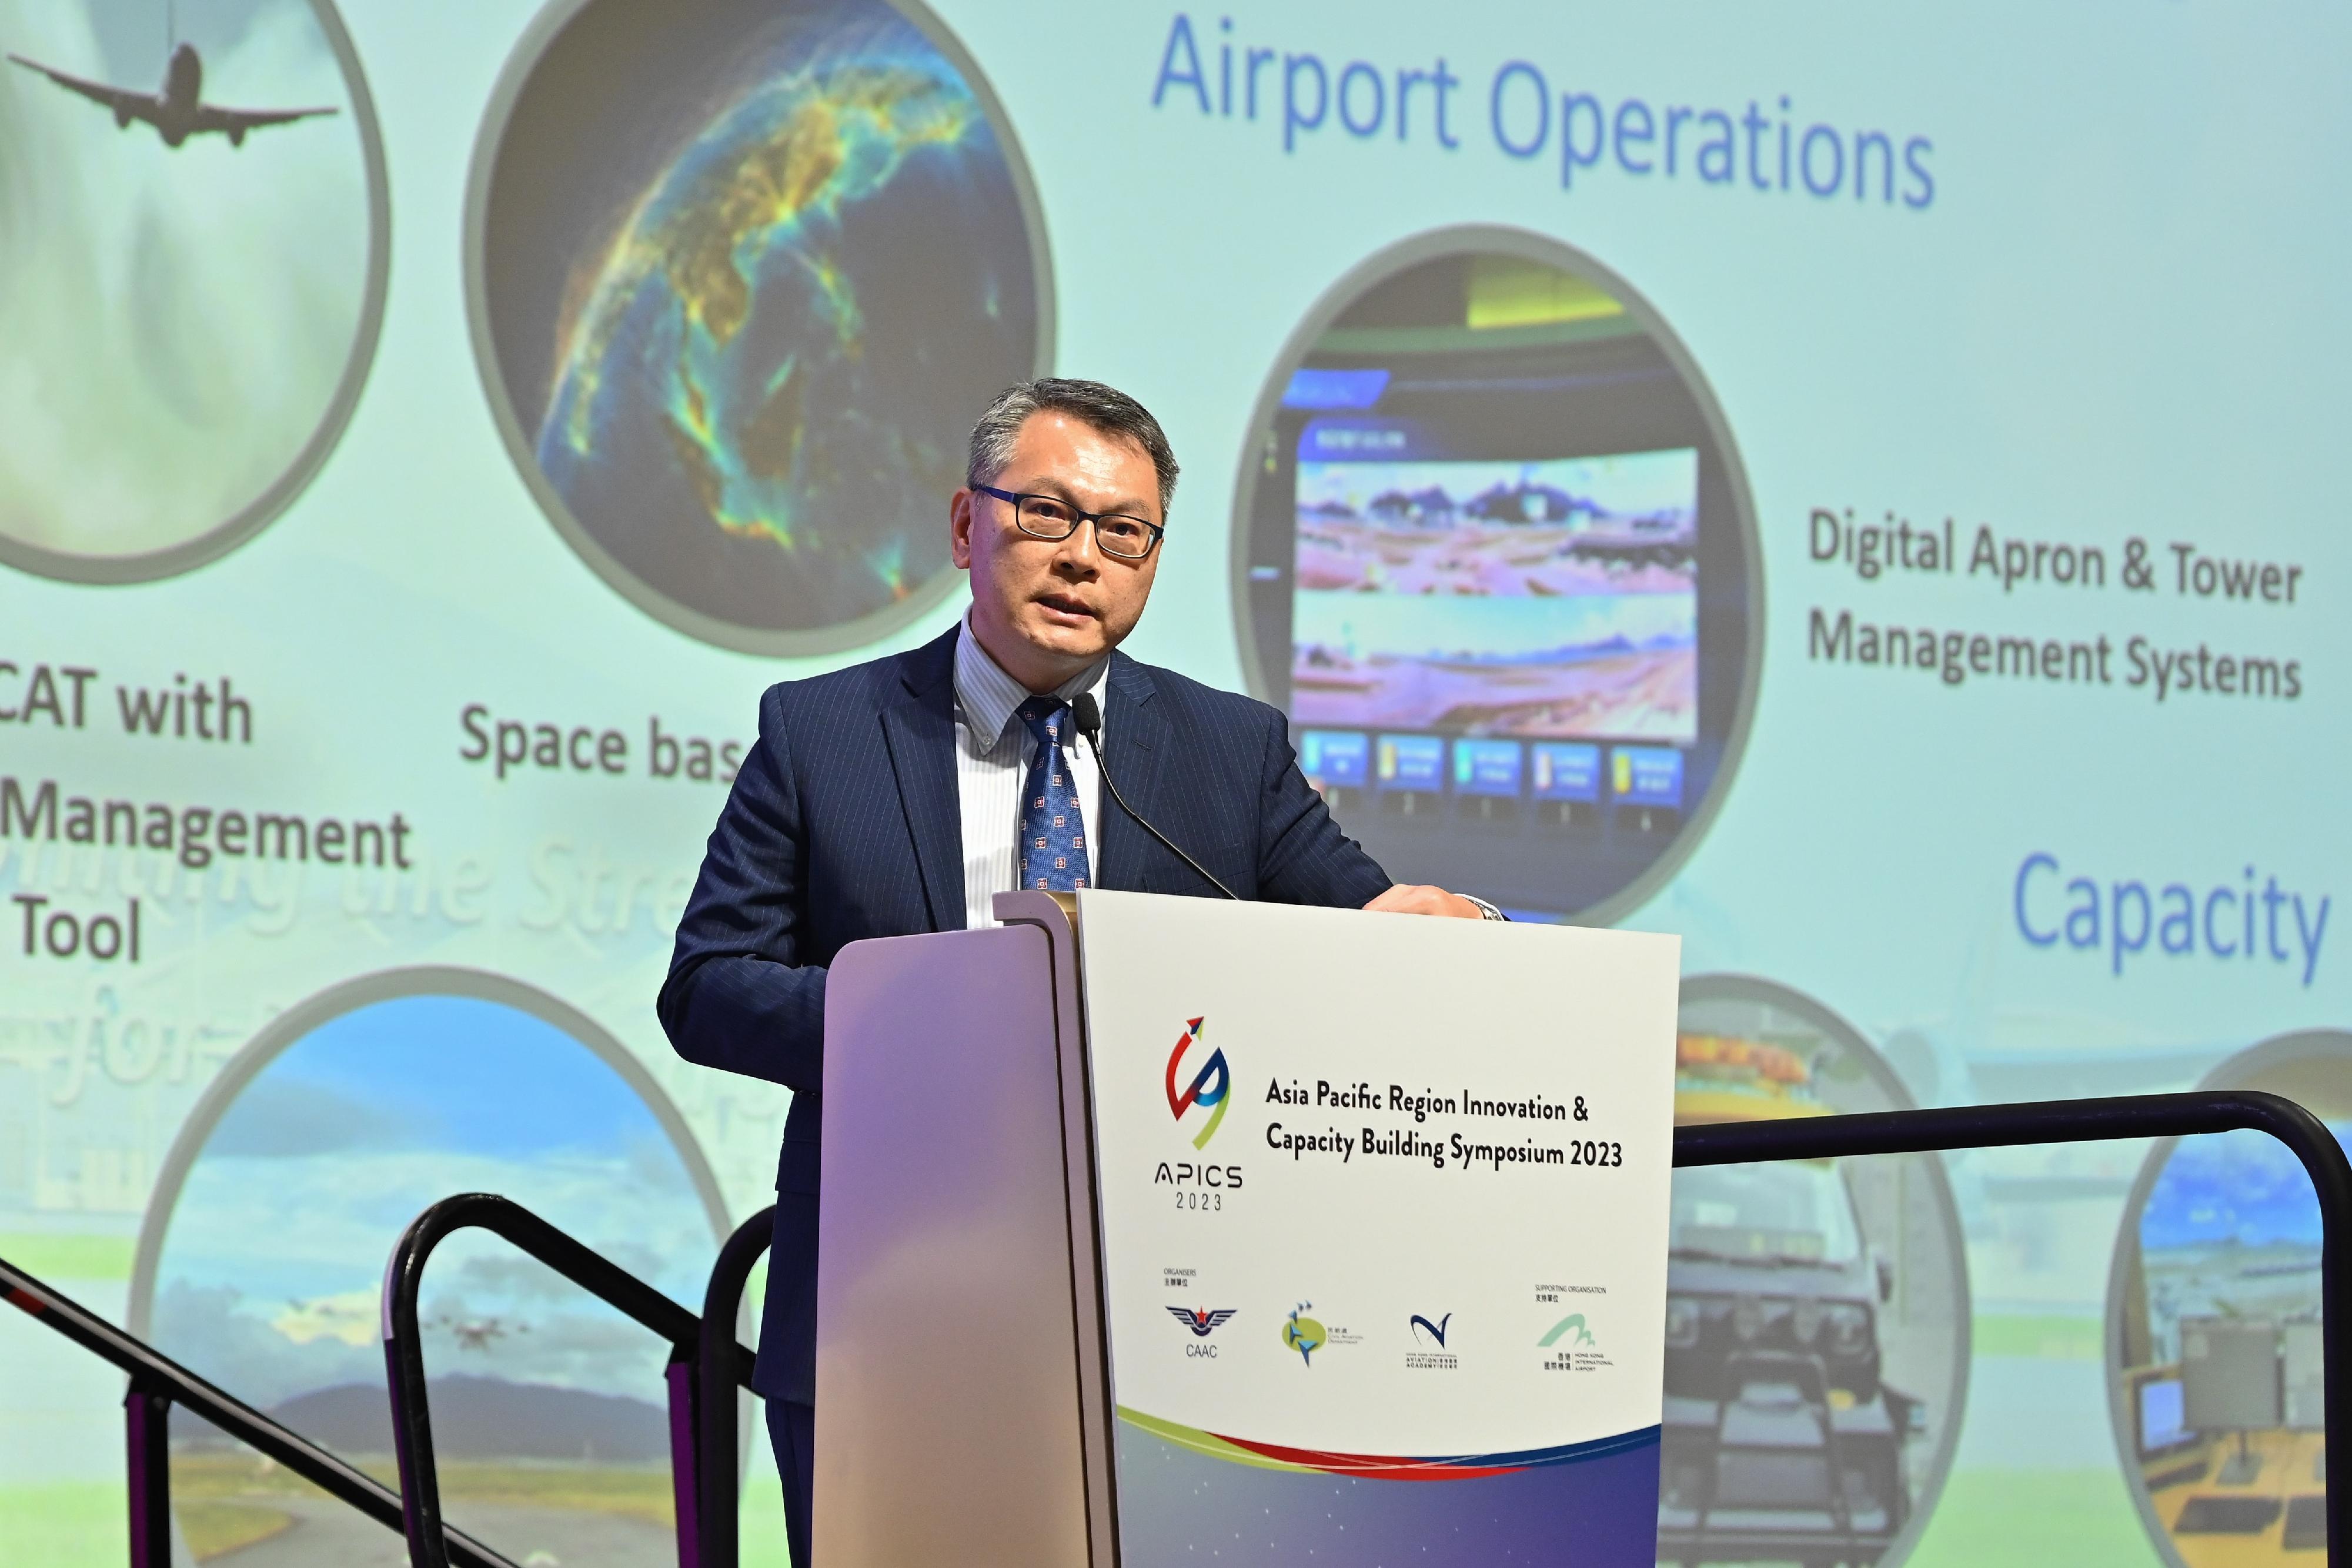 The Director-General of the Hong Kong Civil Aviation Department, Mr Victor Liu, gave a keynote speech at the Asia Pacific Region Innovation & Capacity Building Symposium 2023 today (December 14).